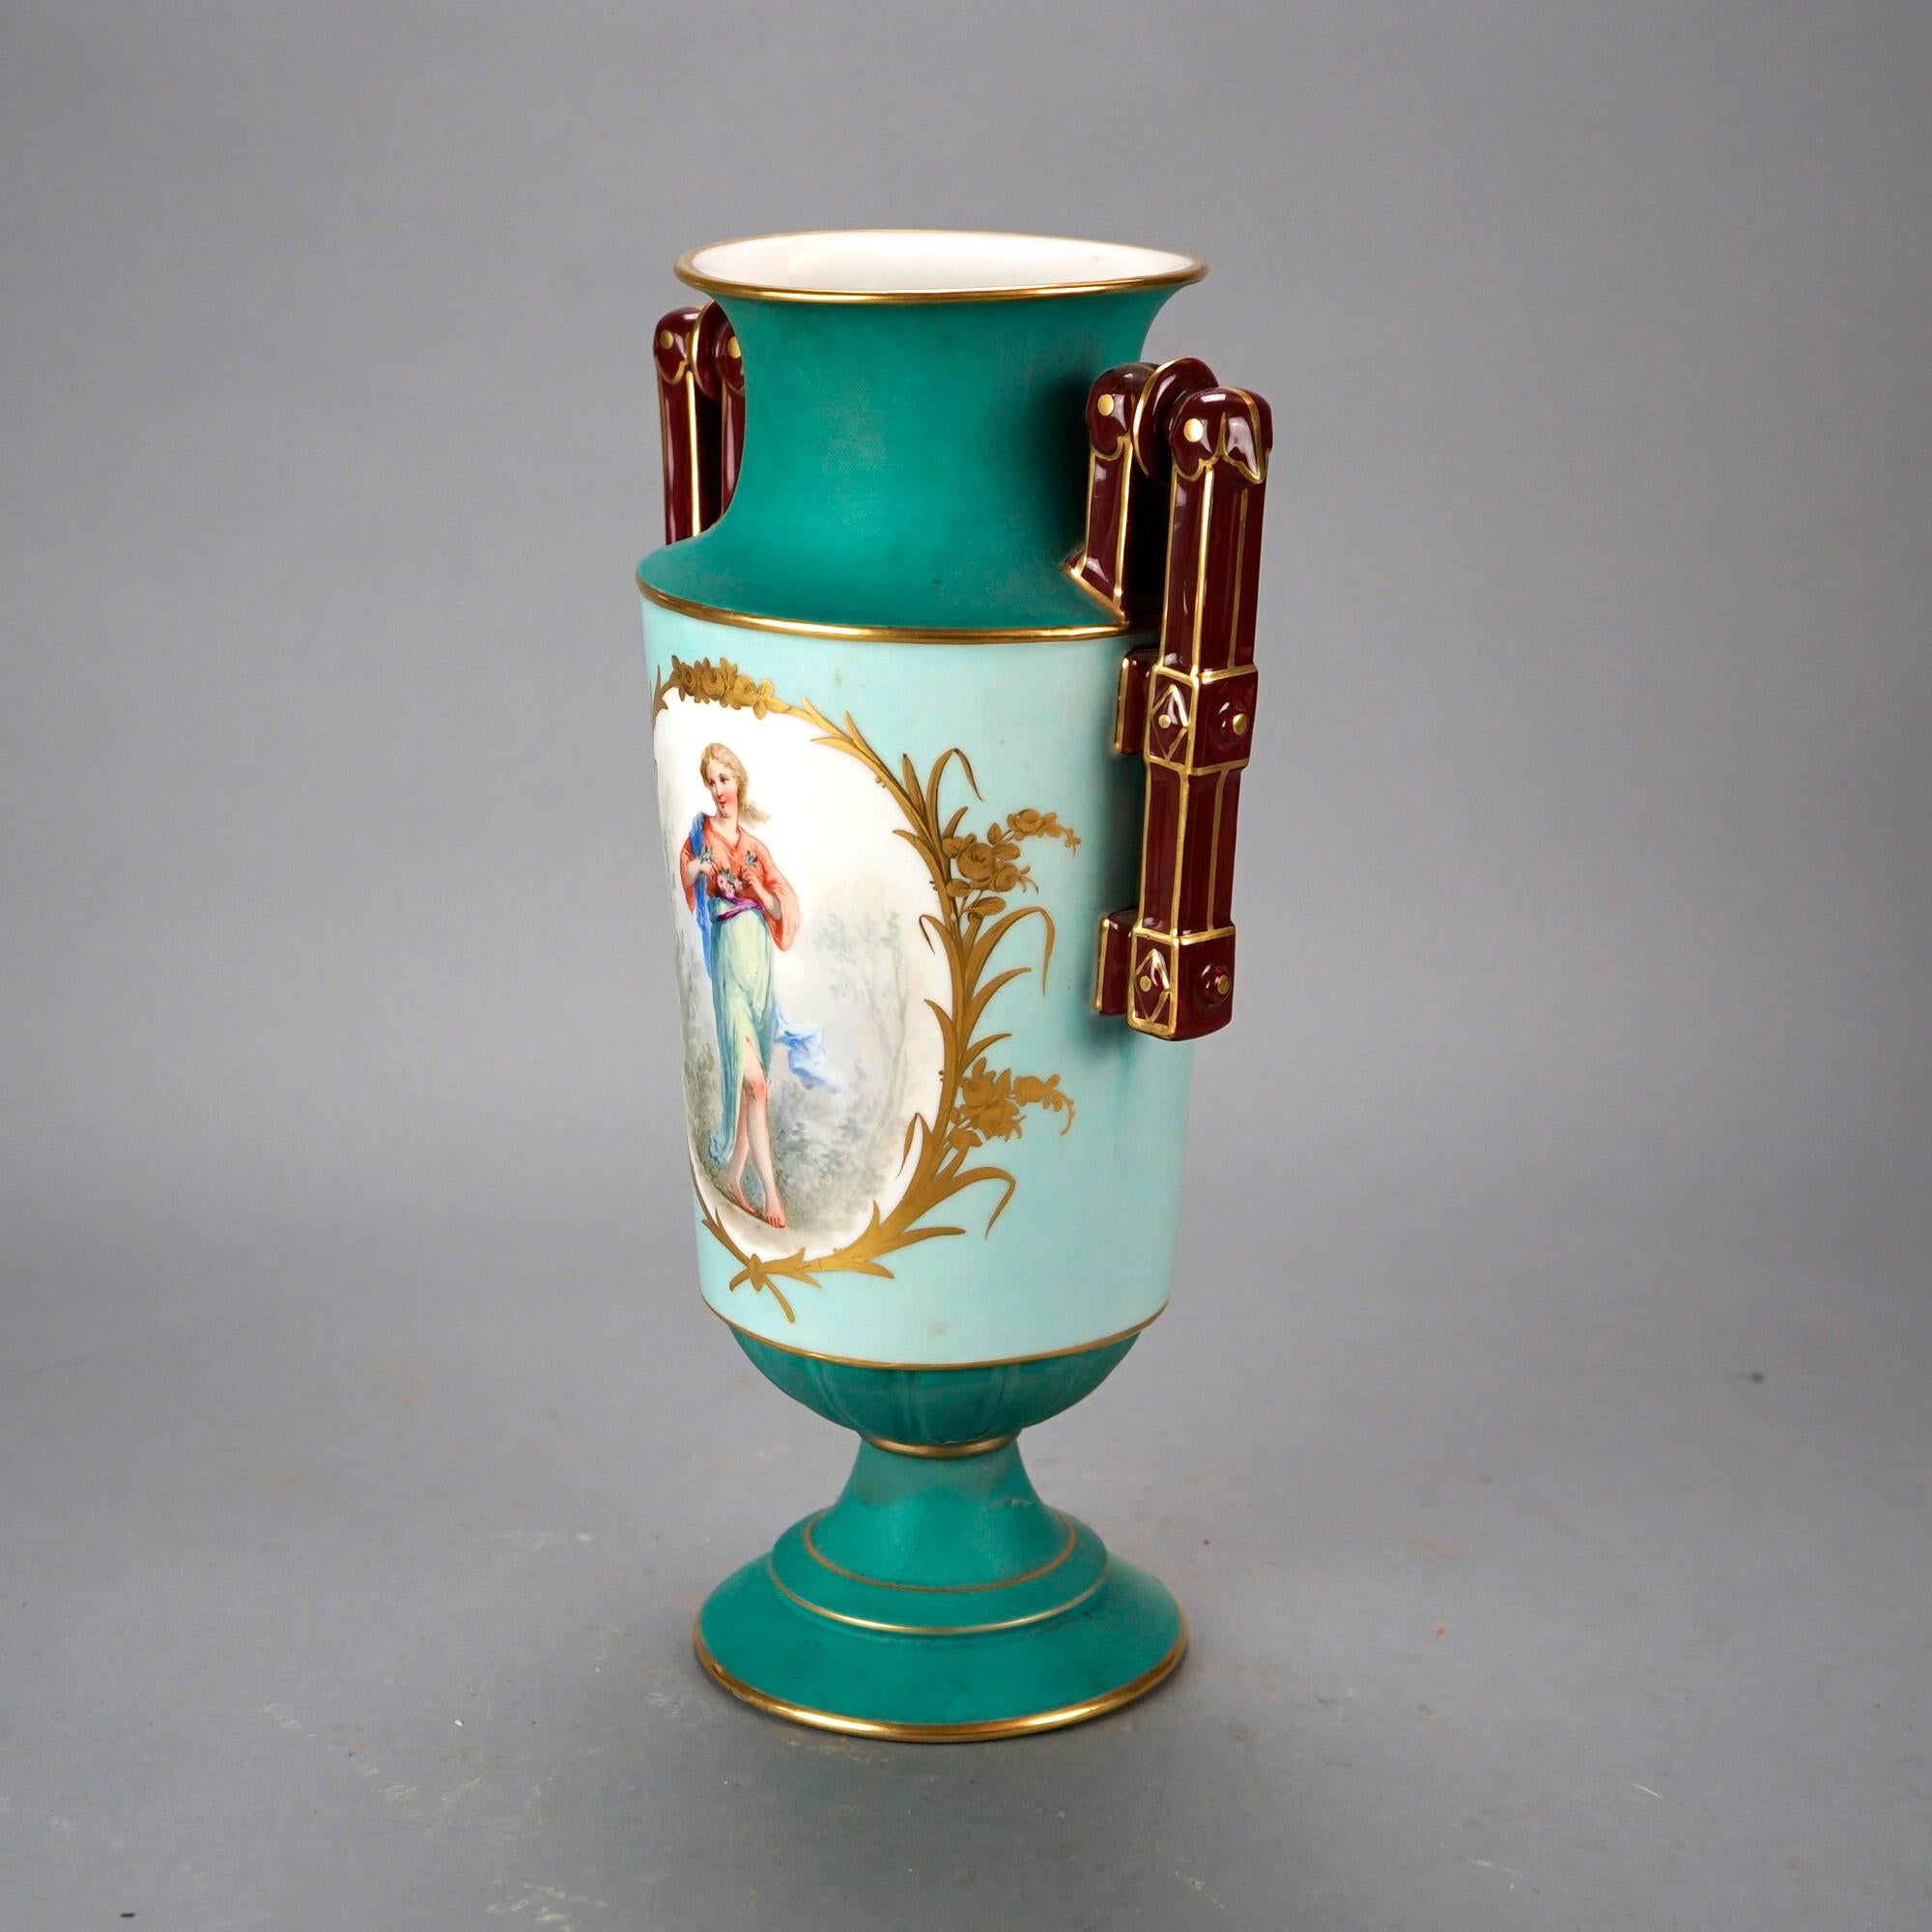 An antique and large French Old Paris vase offers porcelain footed construction with hand painted portrait of young girl on green ground, flanking handles and gilt highlights throughout, 19th century

Measures- 15.5'' H x 8.75'' W x 6.25'' D.